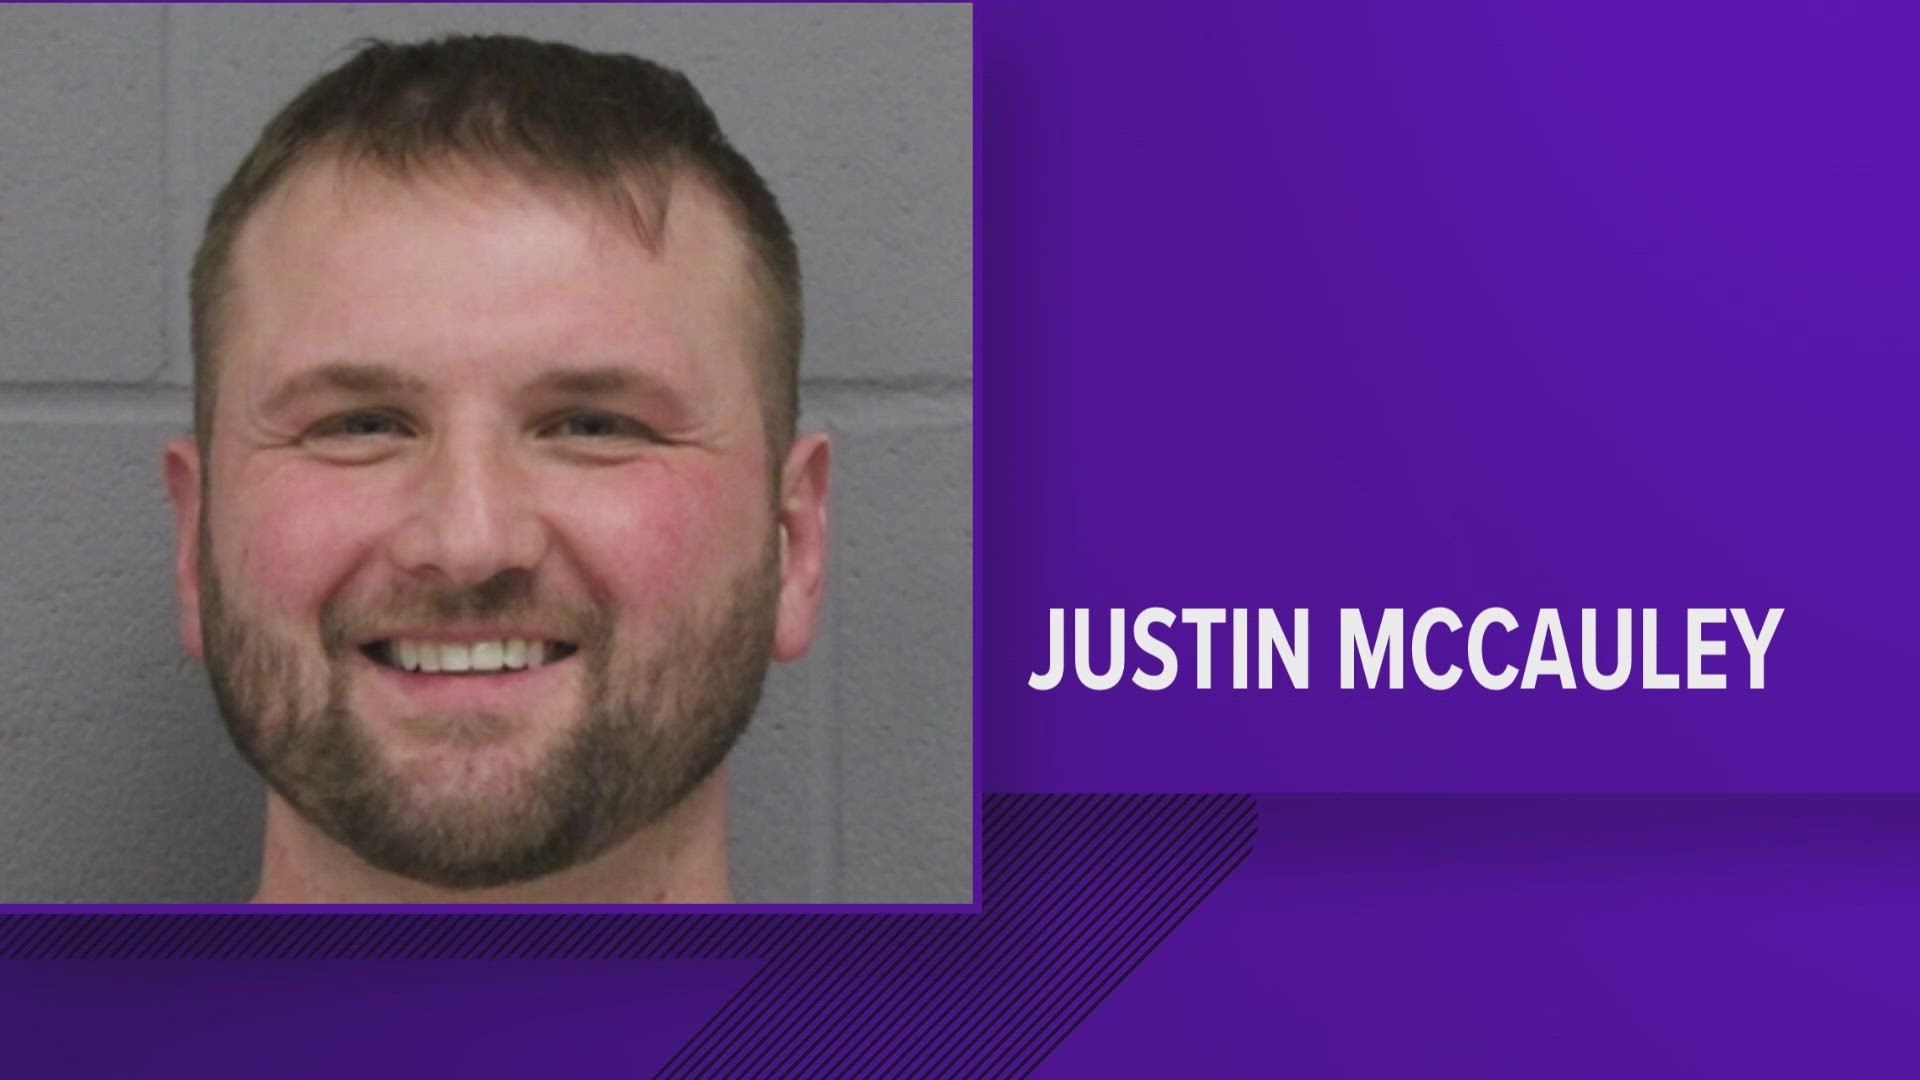 Court documents obtained by KVUE stated Tesla employee Justin McCauley posted threats to X.